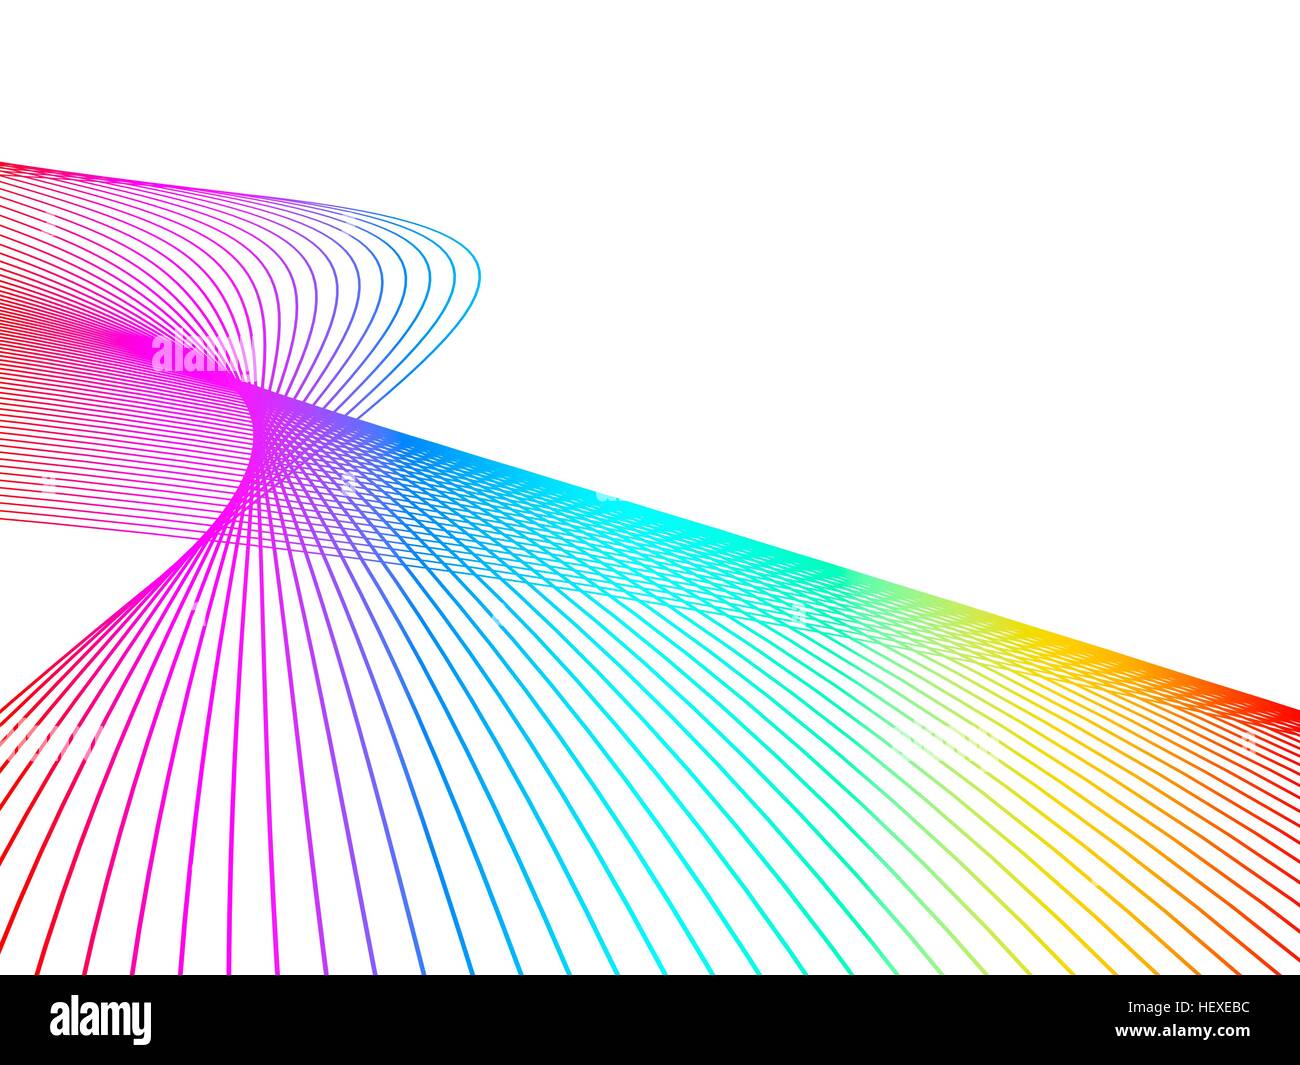 Abstract line pattern. Stock Photo